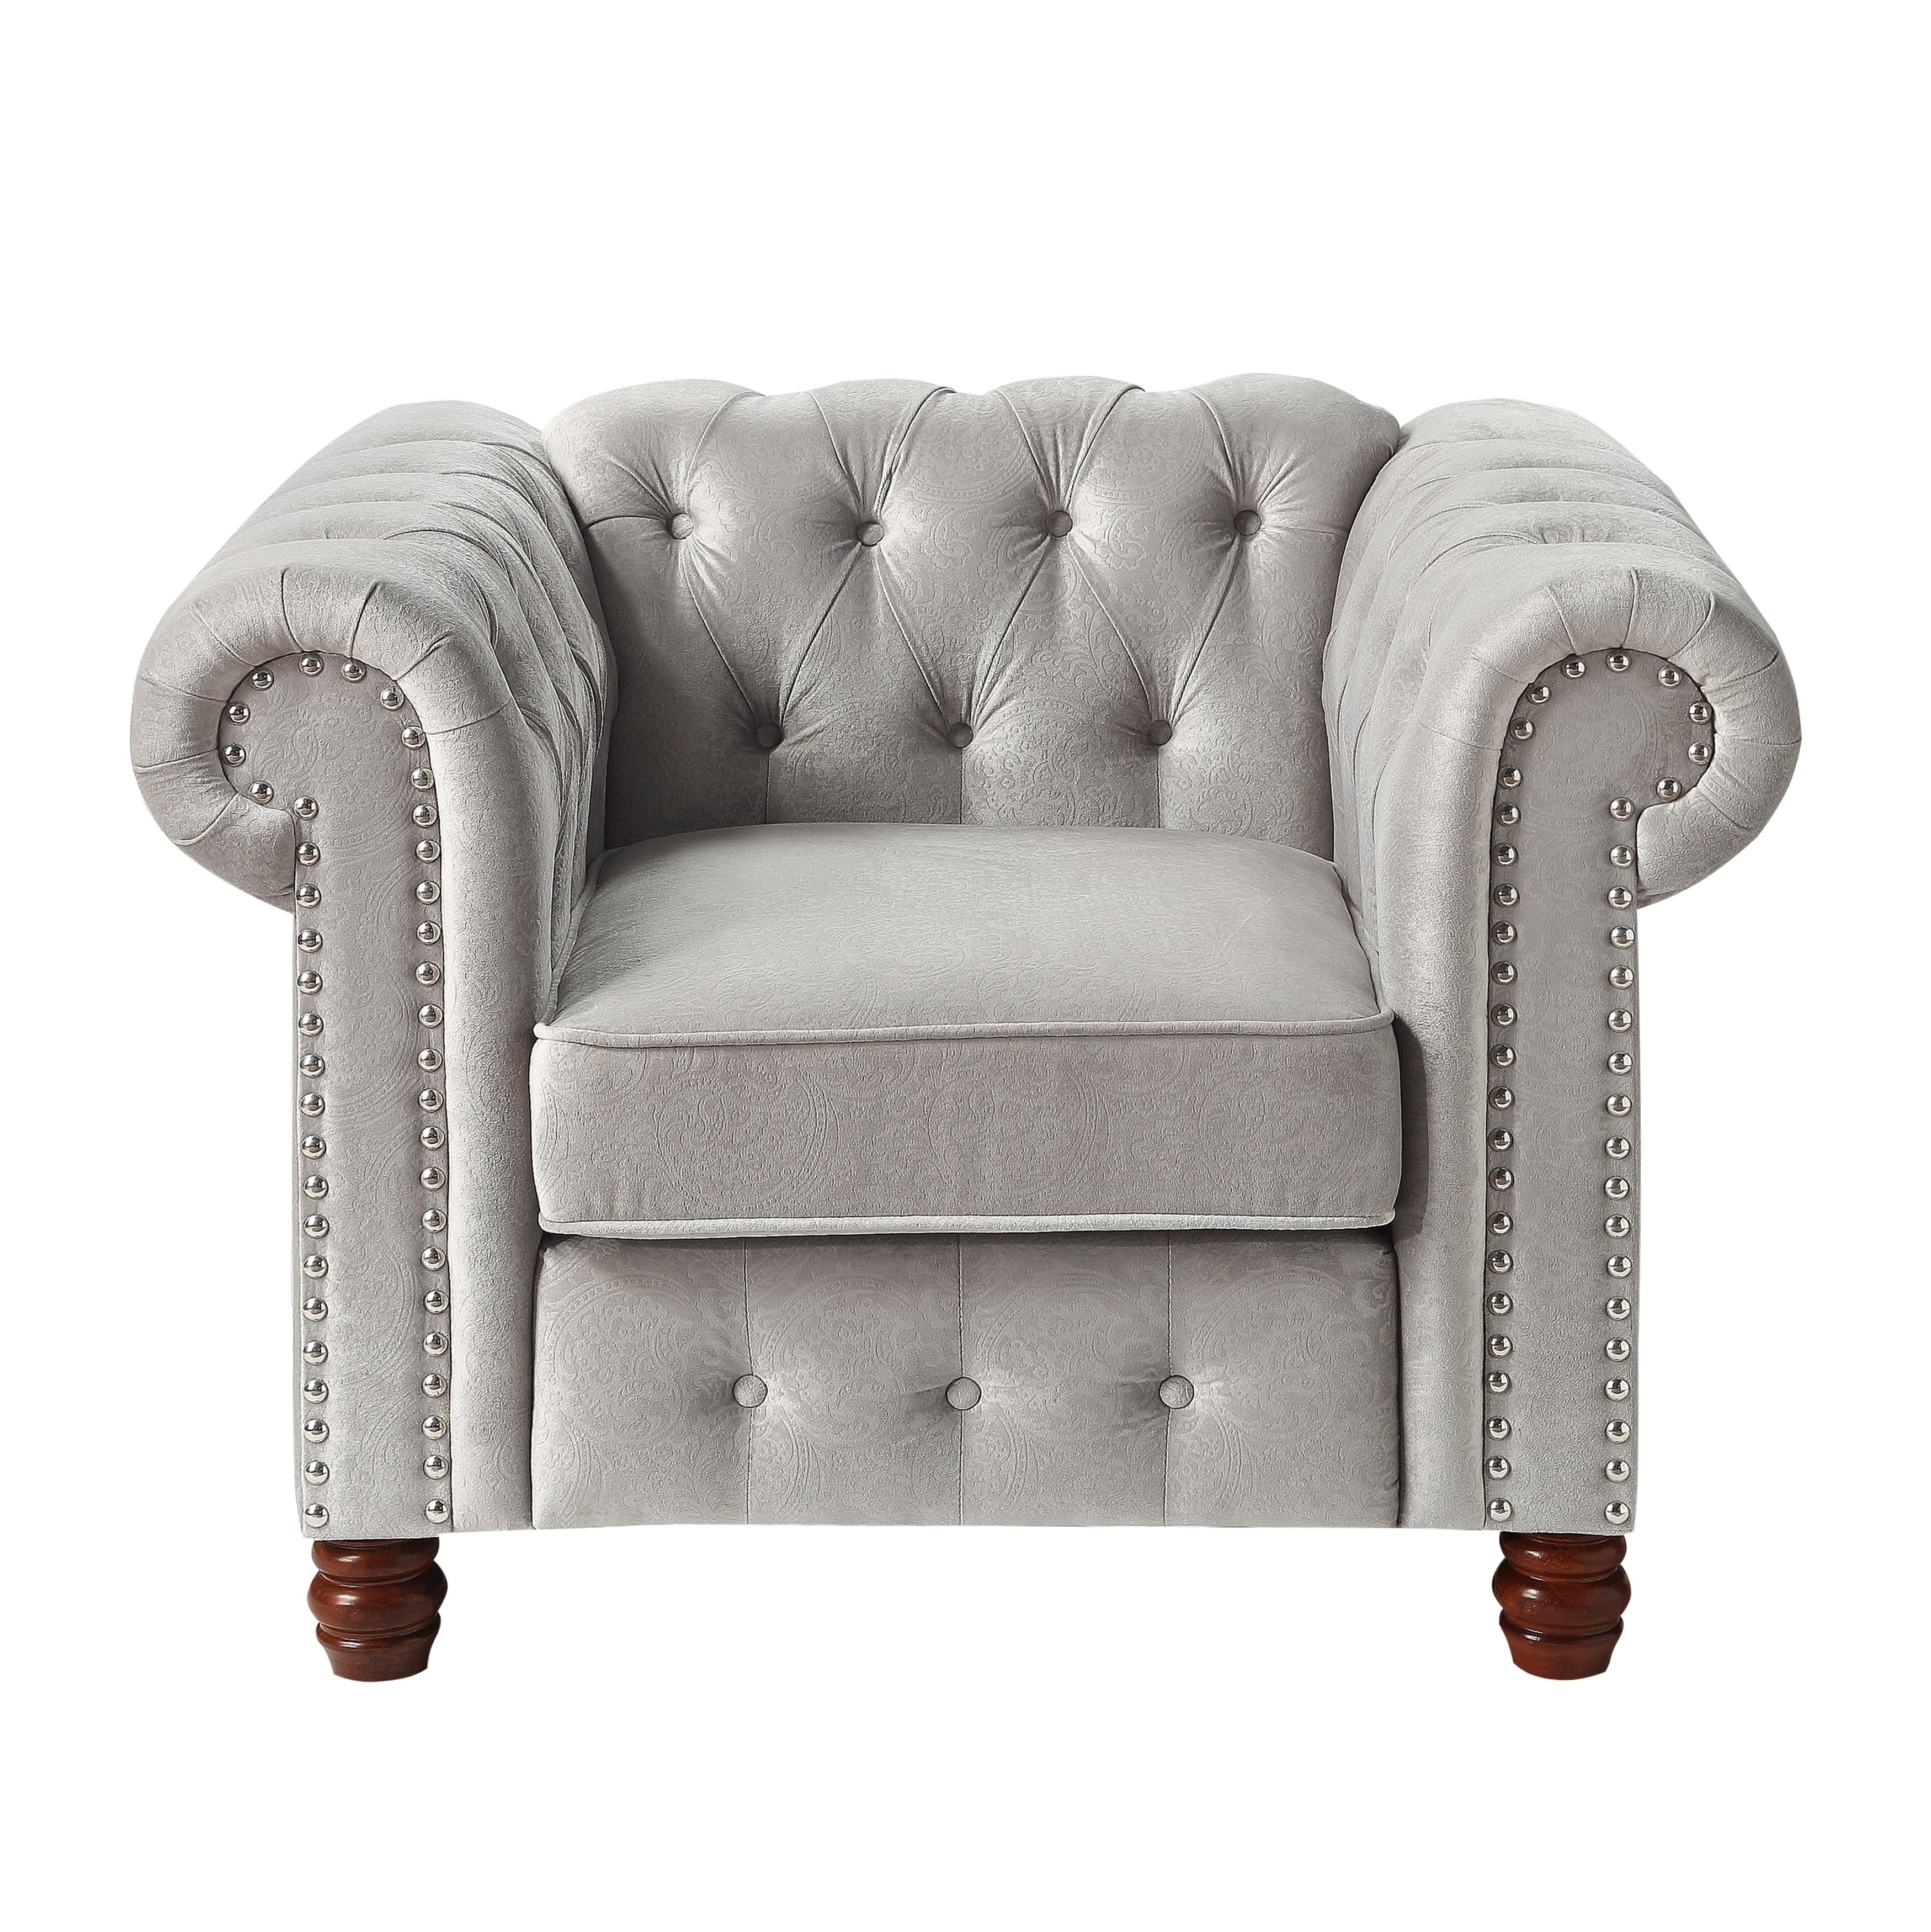 Traditional Arm Chair 9326GY-1 Welwyn 9326GY-1 in Gray Velvet